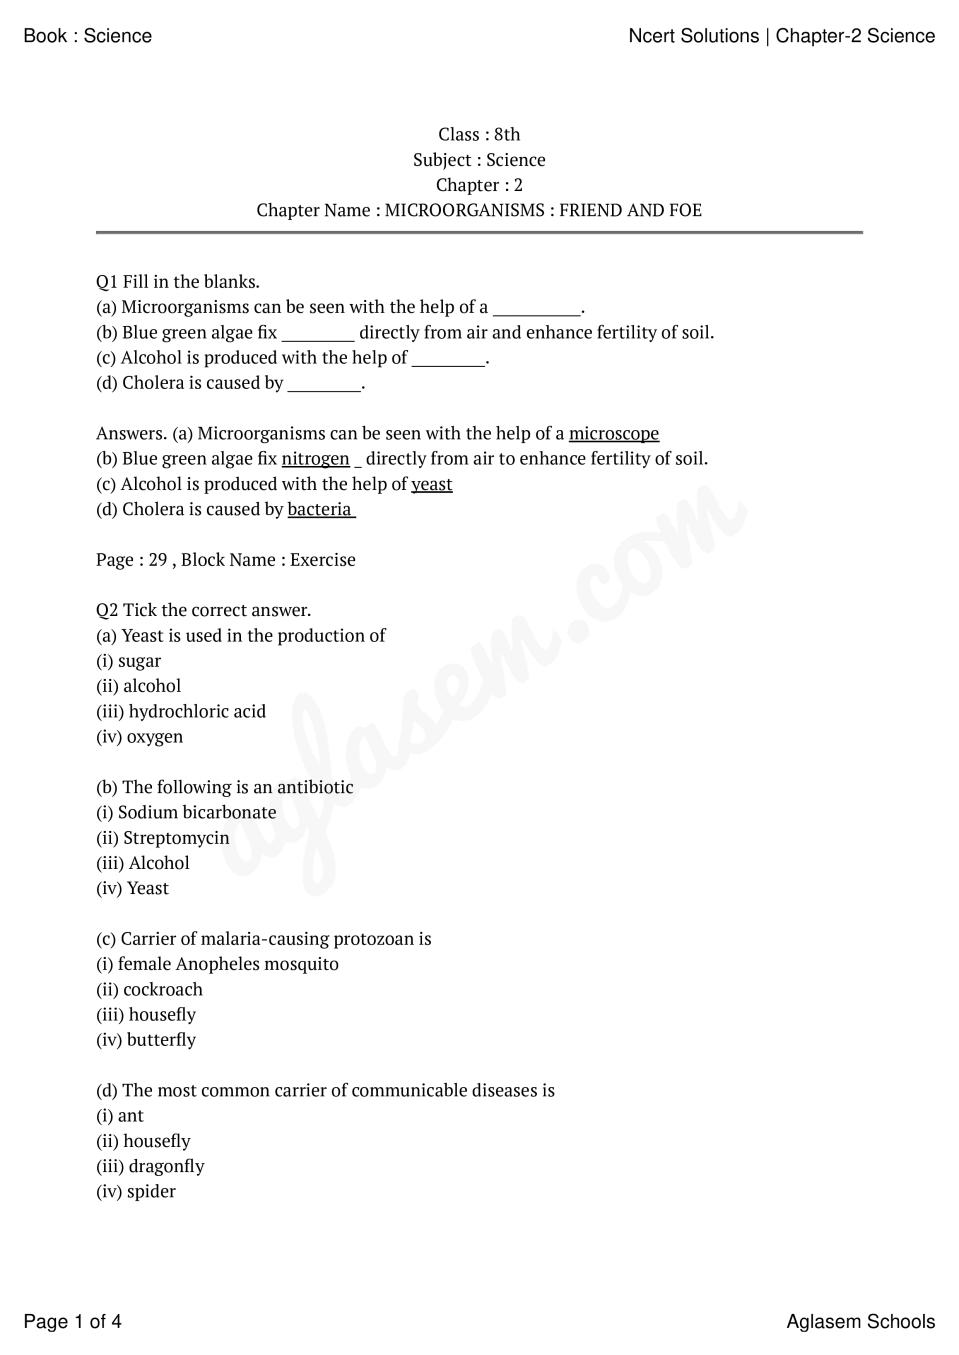 class 8 science chapter 2 assignment solution